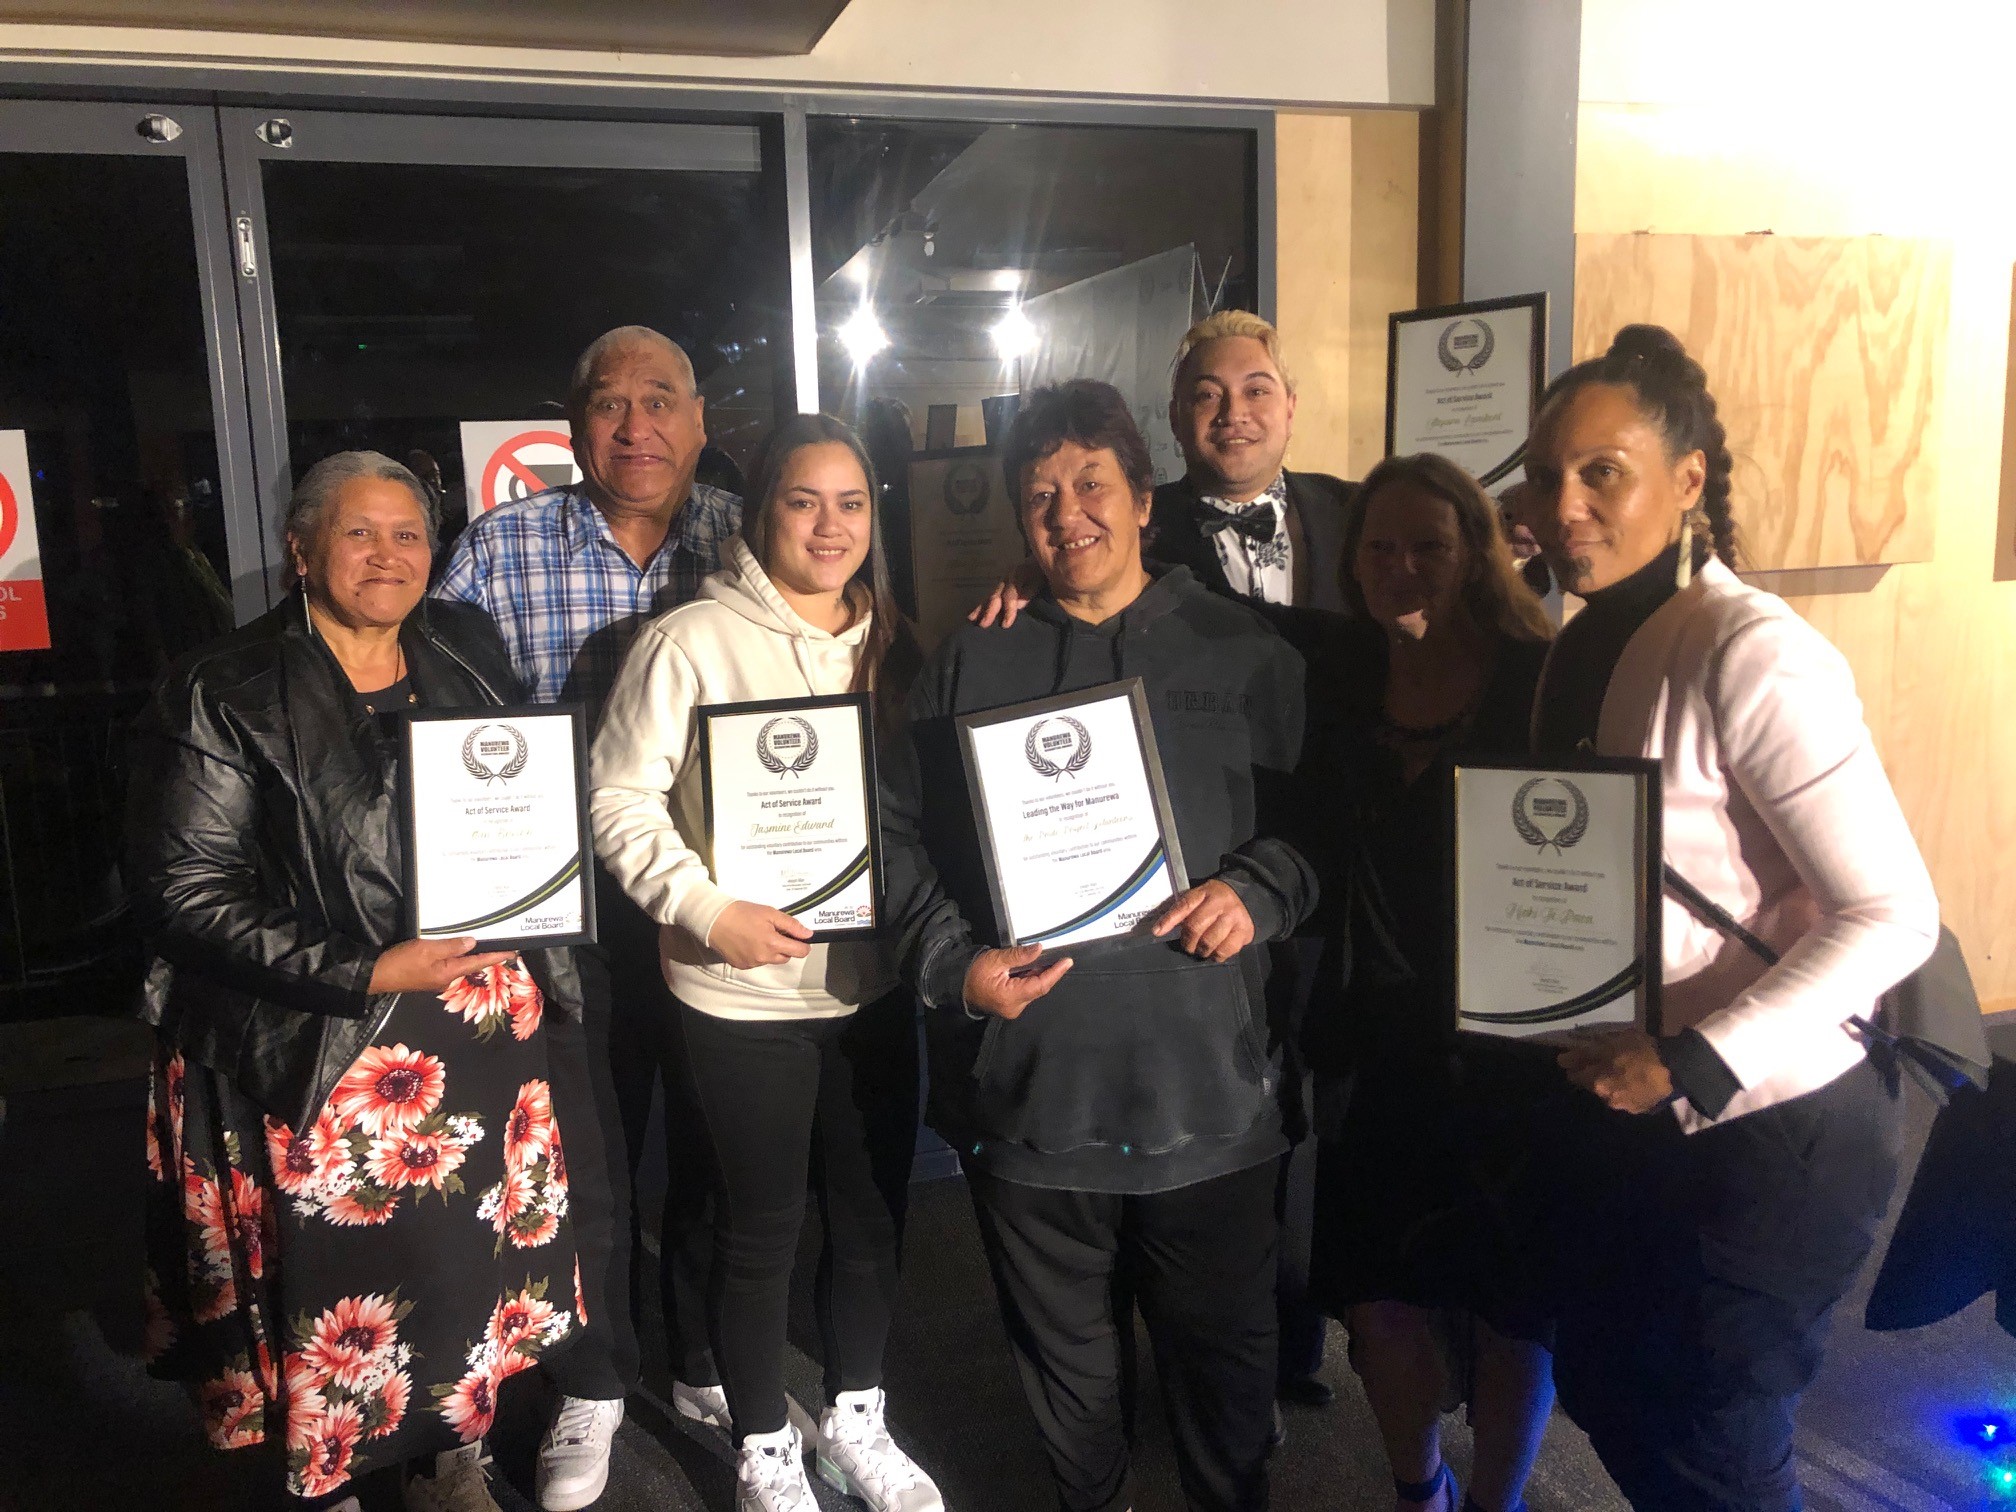 Clendon's Pride Project volunteers received several nominations from the local community.